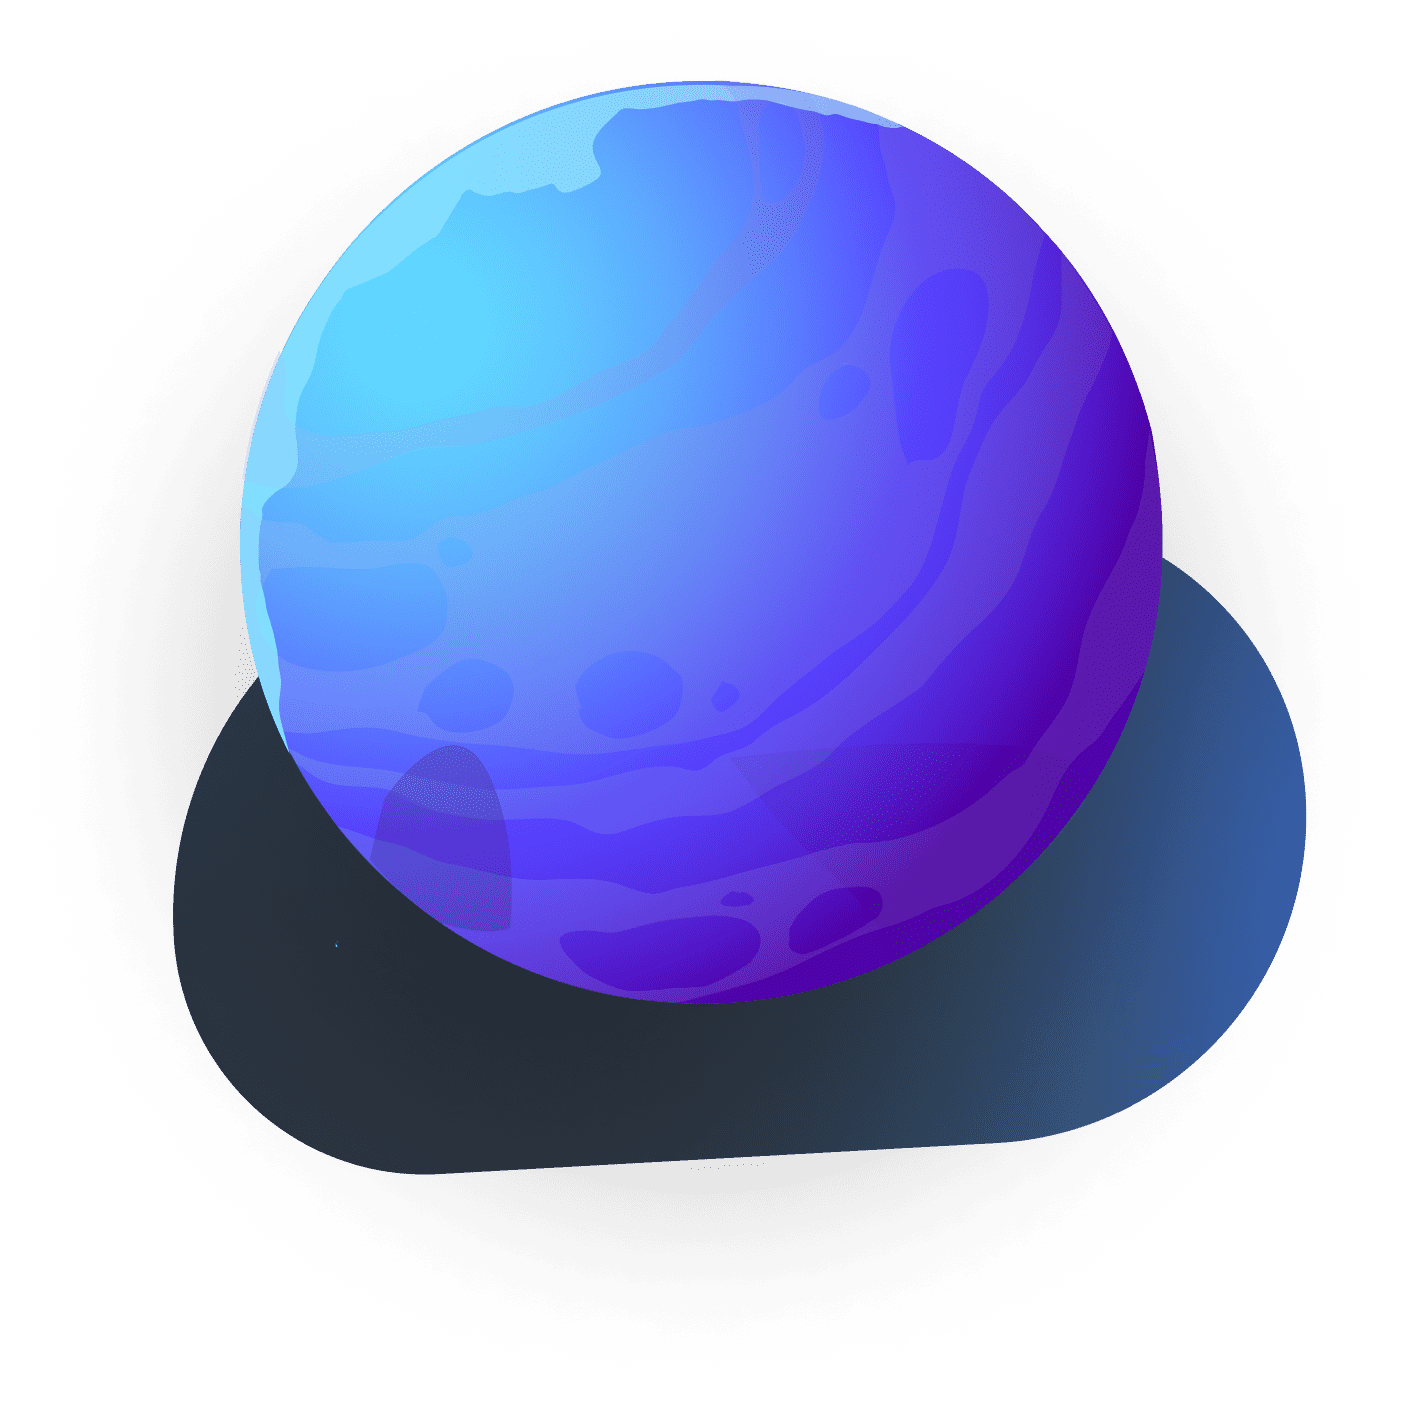 a fantasy globe of bright blue, pink and purple shades